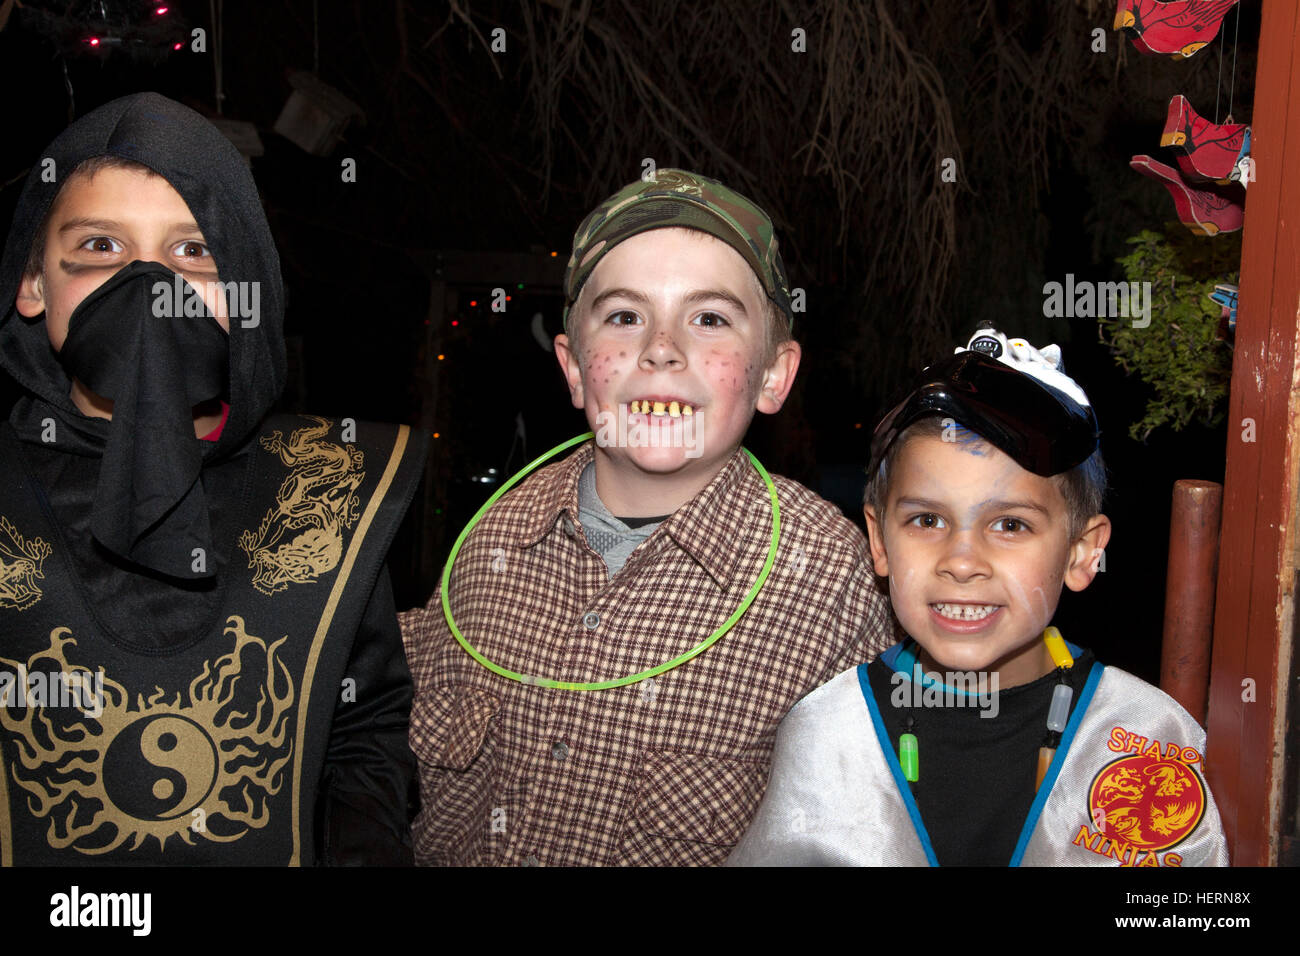 Three costumed boys in Halloween masked oriental Yin Yang & country bumpkin outfits trick or treating. St Paul Minnesota MN USA Stock Photo